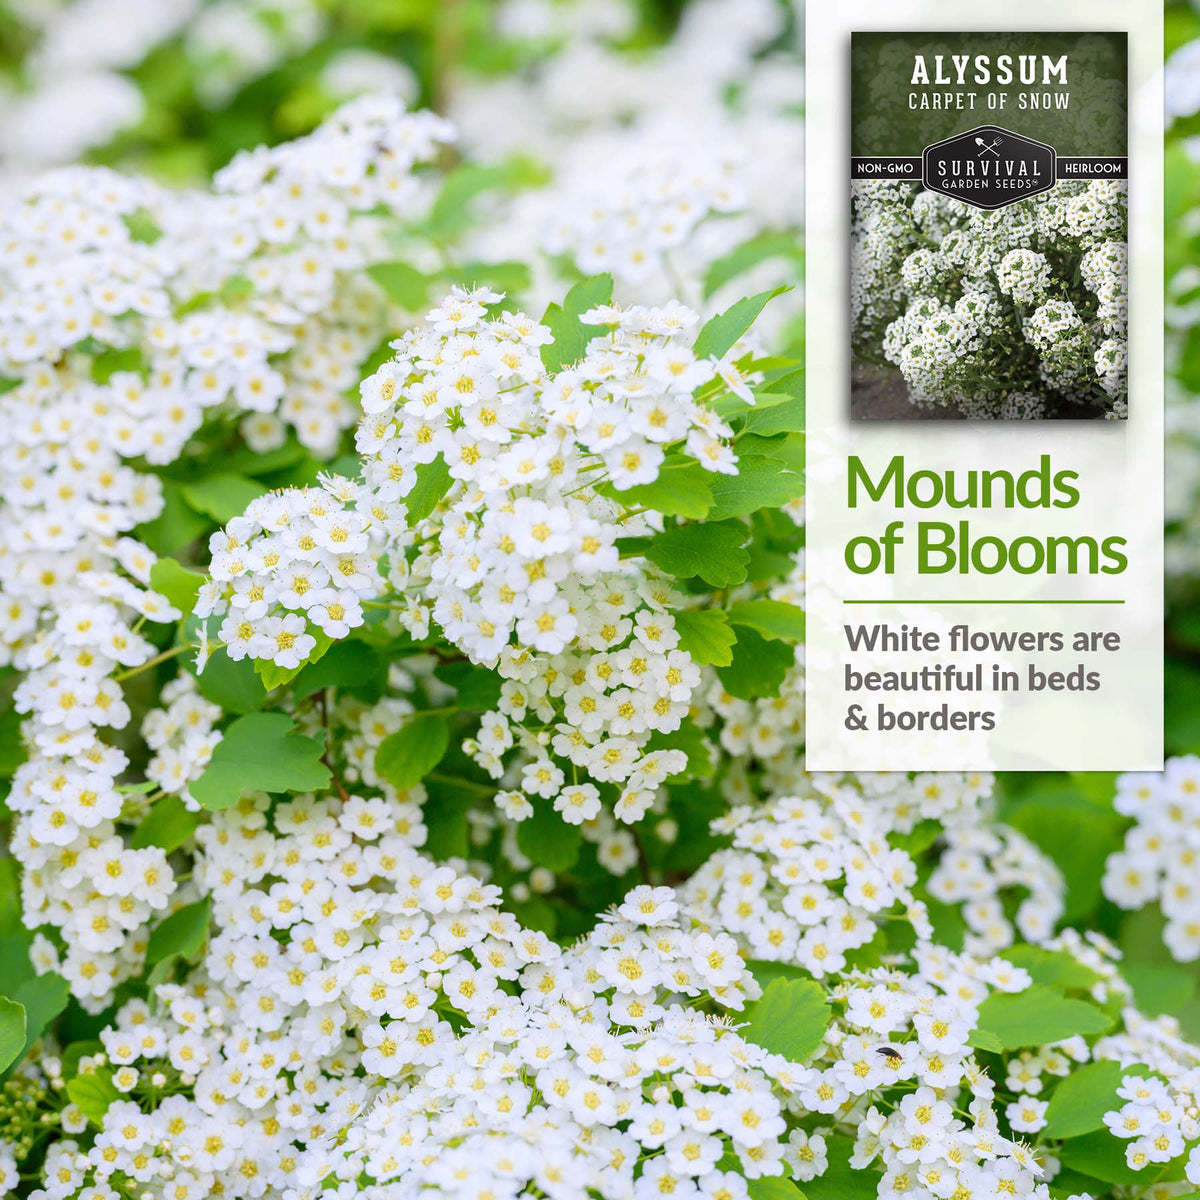 Alyssum flowers are beautiful in beds and borders